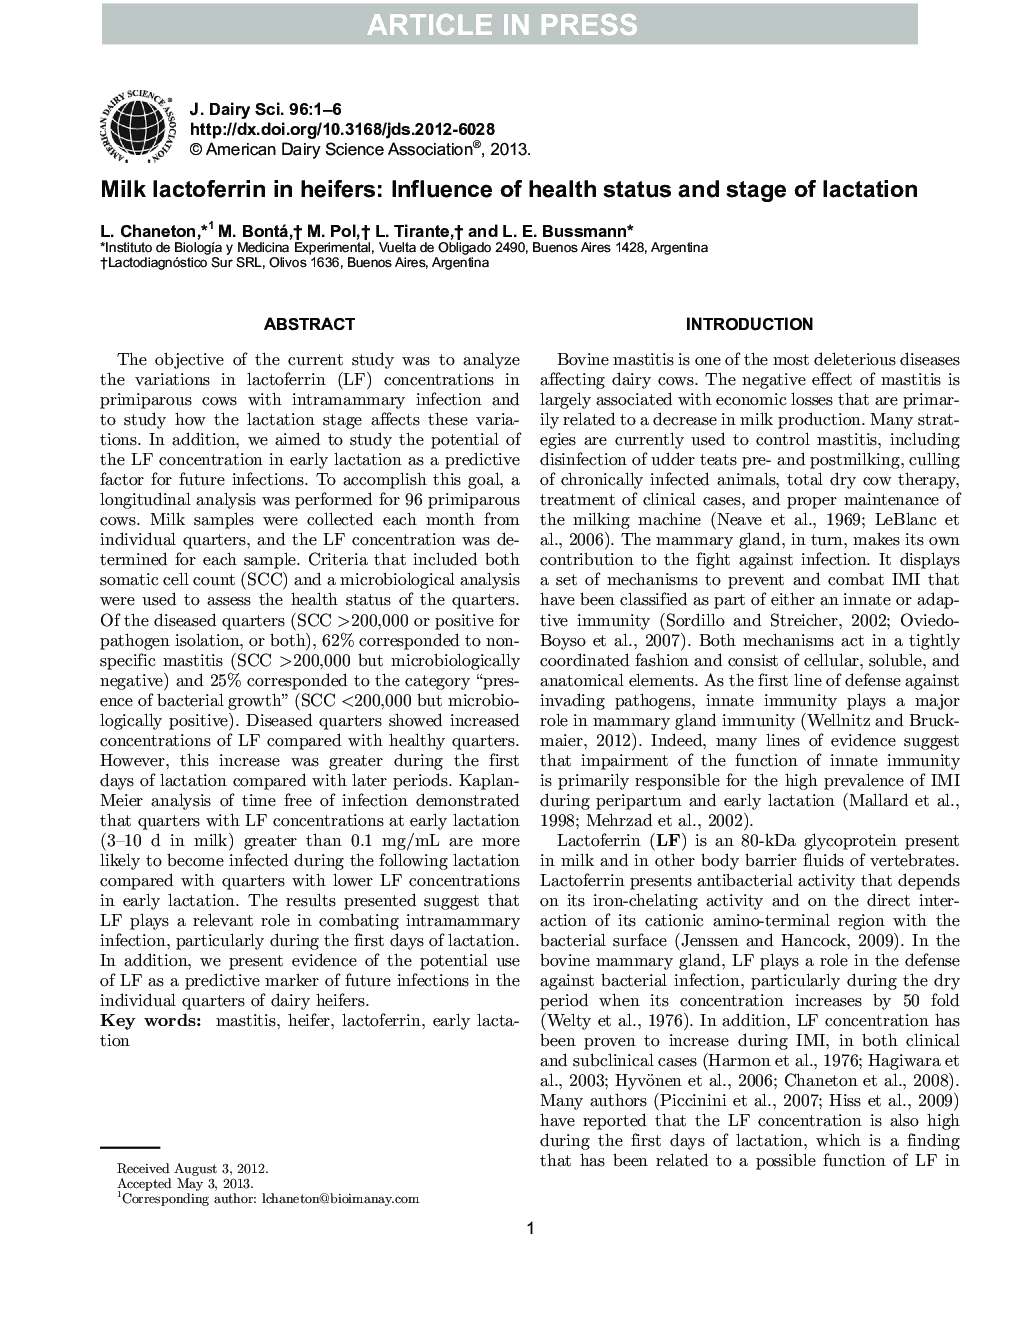 Milk lactoferrin in heifers: Influence of health status and stage of lactation